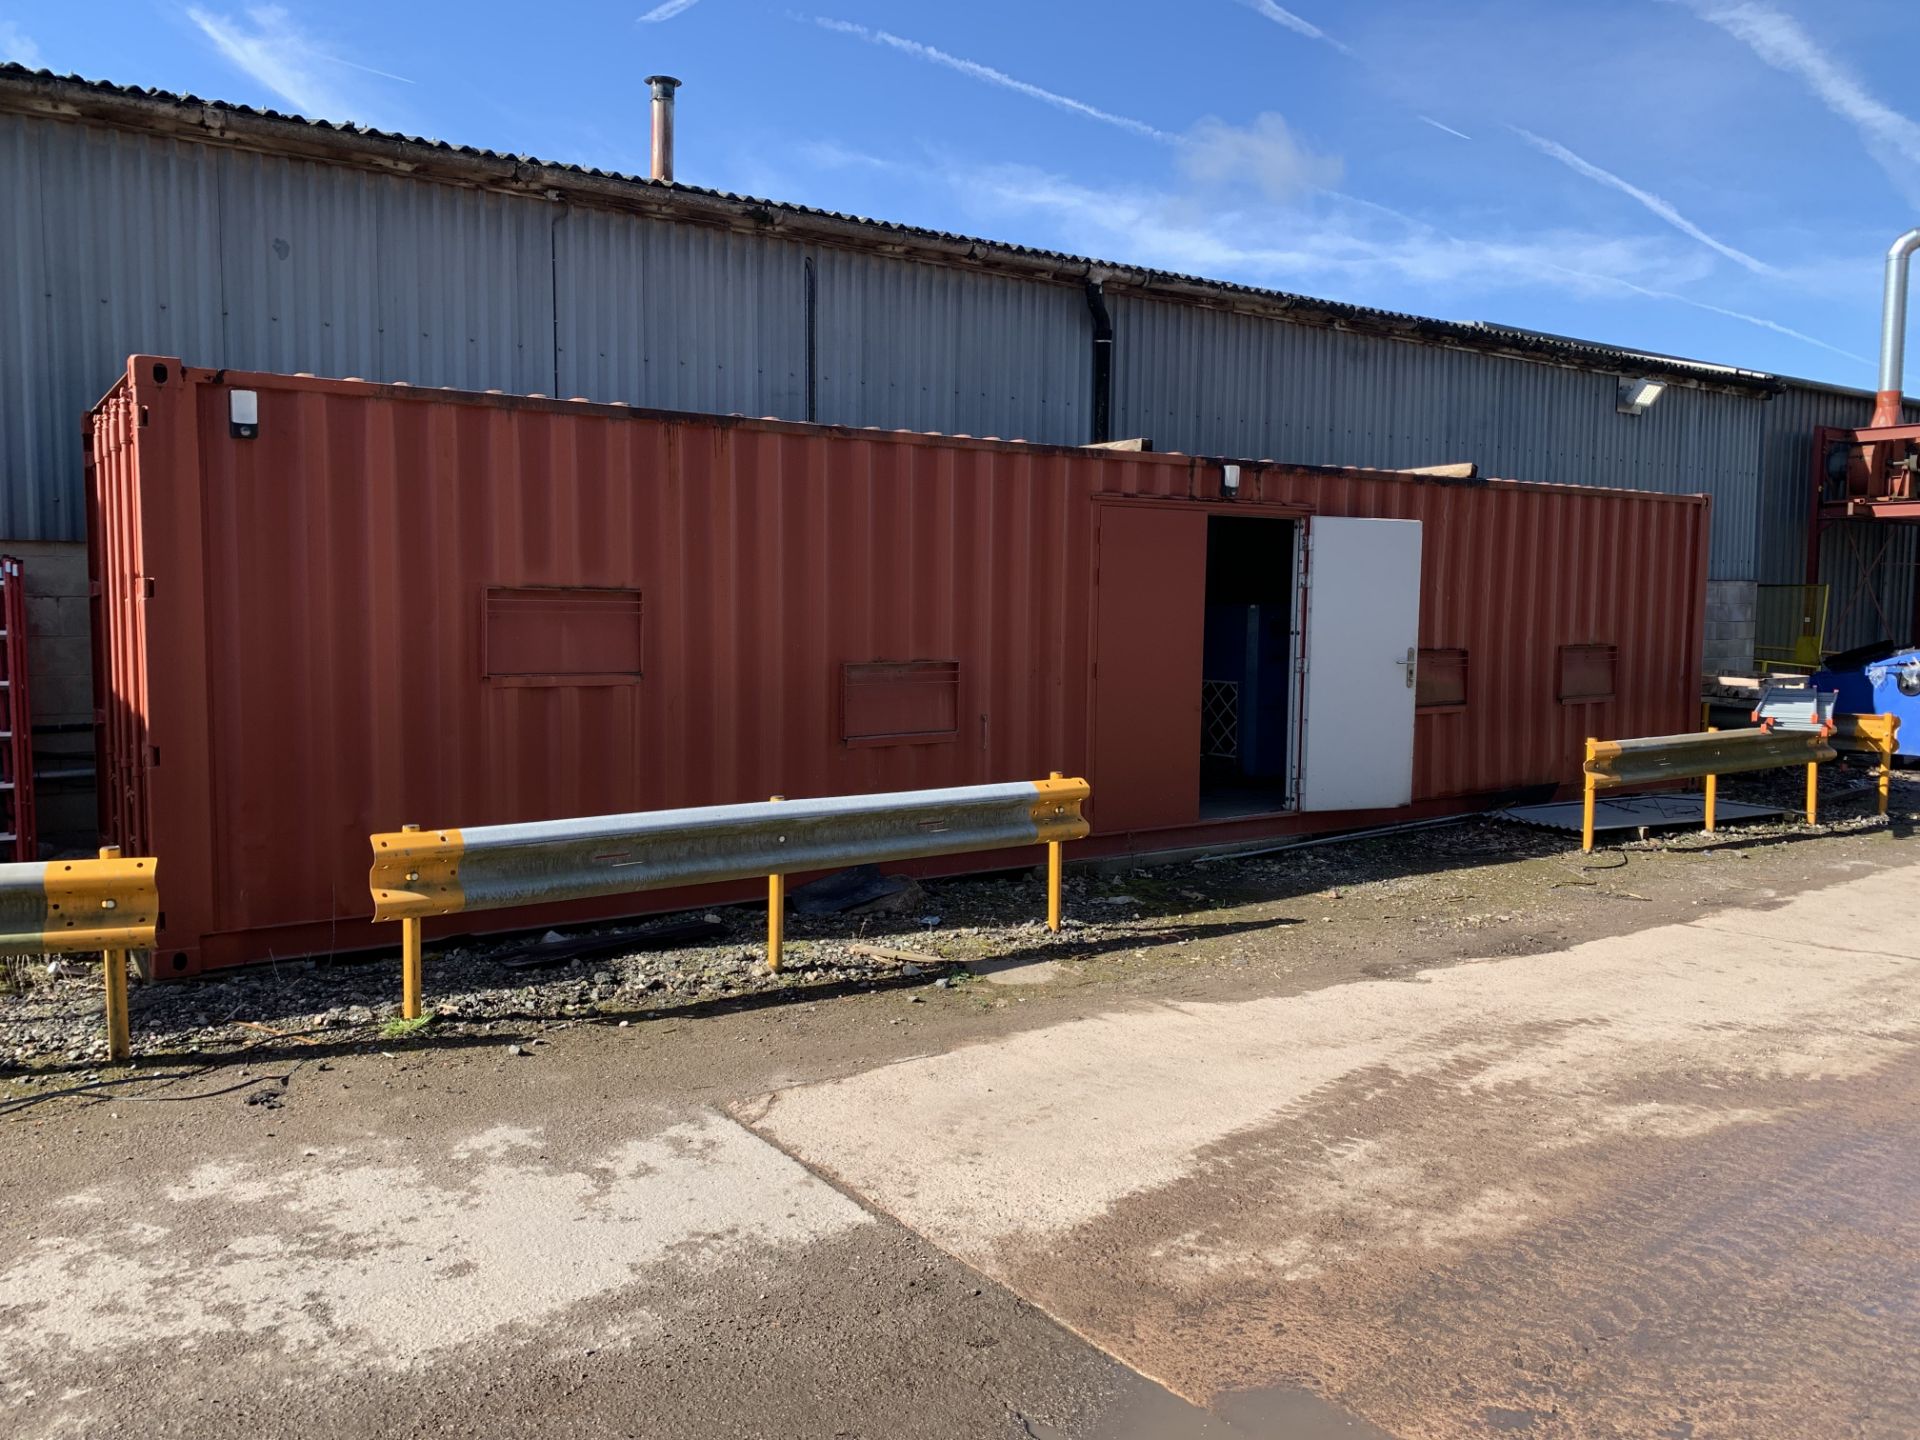 40ft Container converted to Compressor Room / Workshop (Not Including Contents) - Image 2 of 2